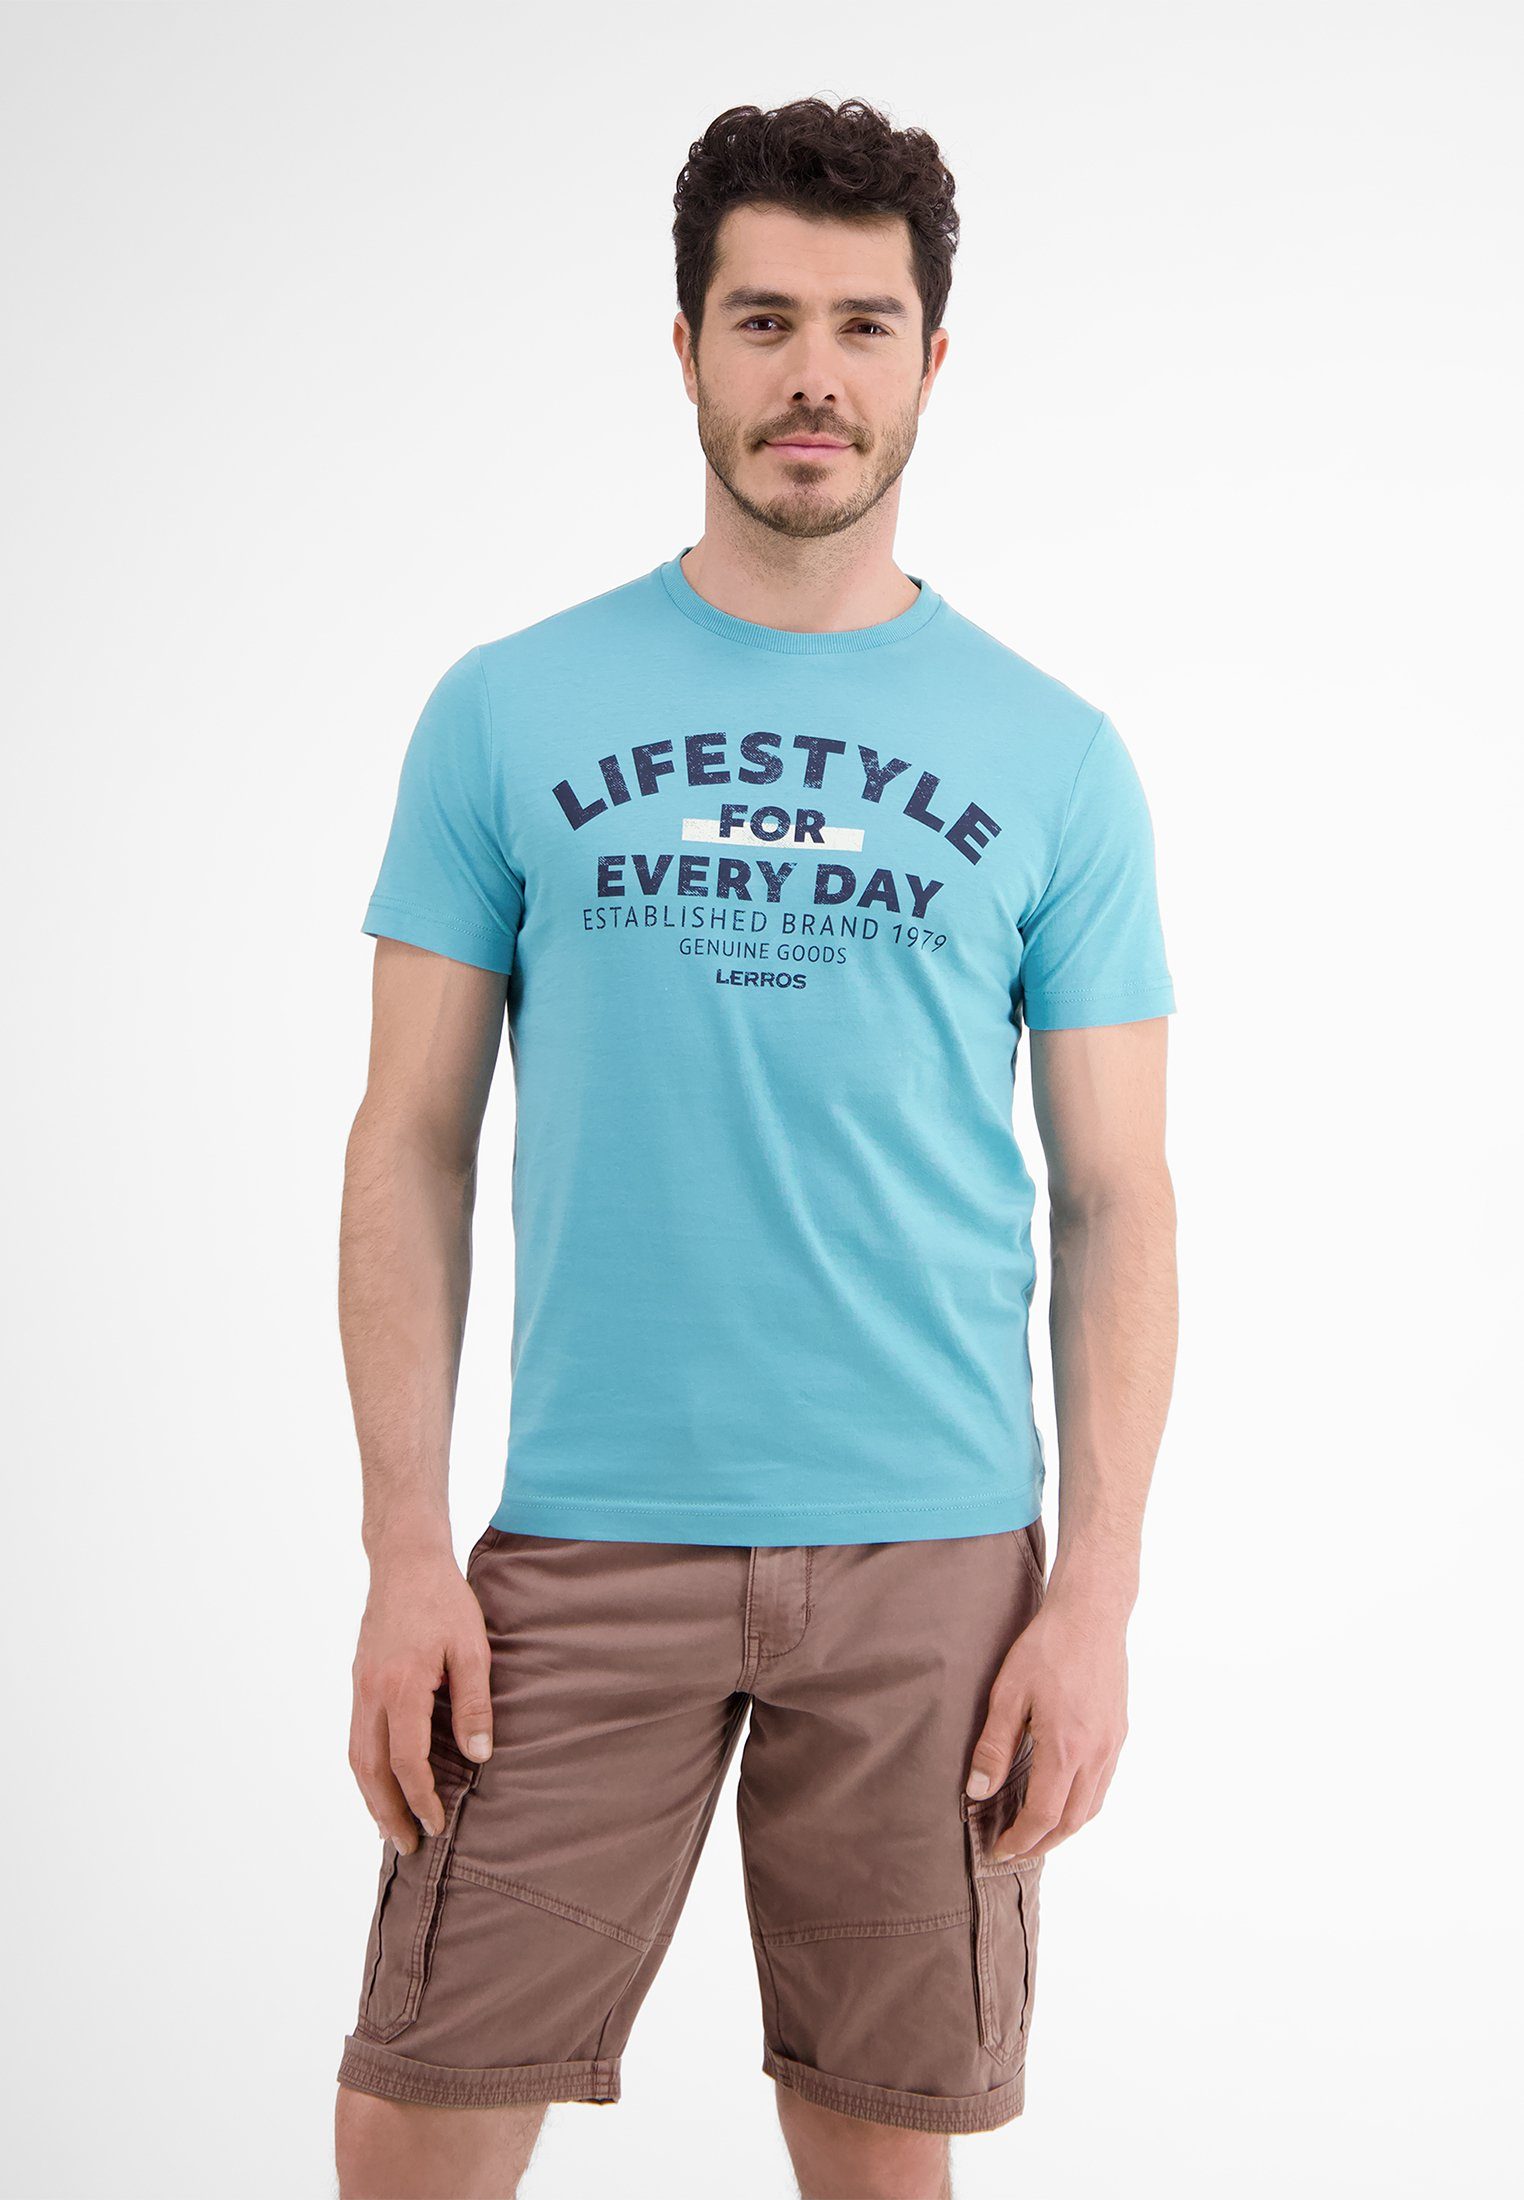 LERROS T-Shirt LERROS T-Shirt *Lifestyle for every day* SKY BLUE